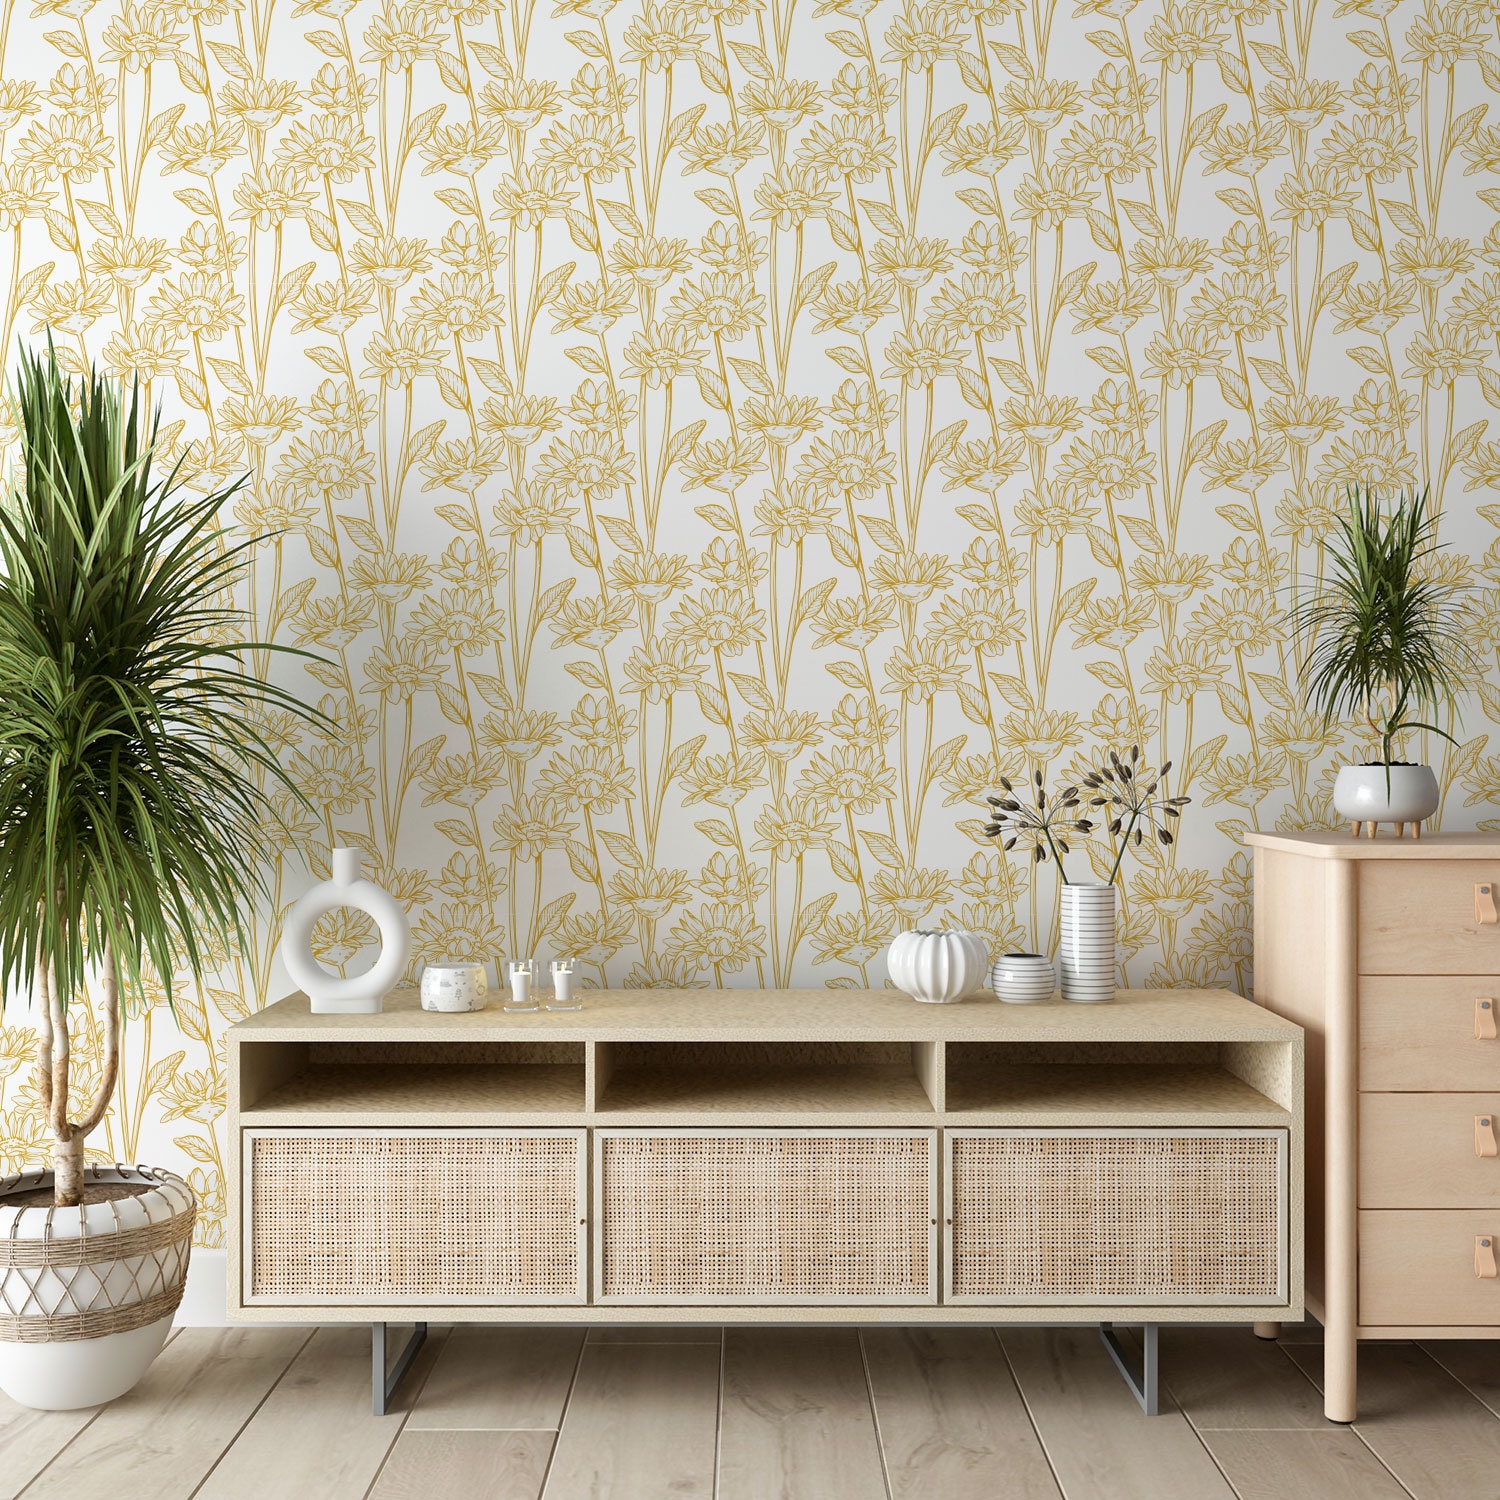 How to Line Drawers with Wallpaper, Decoupage